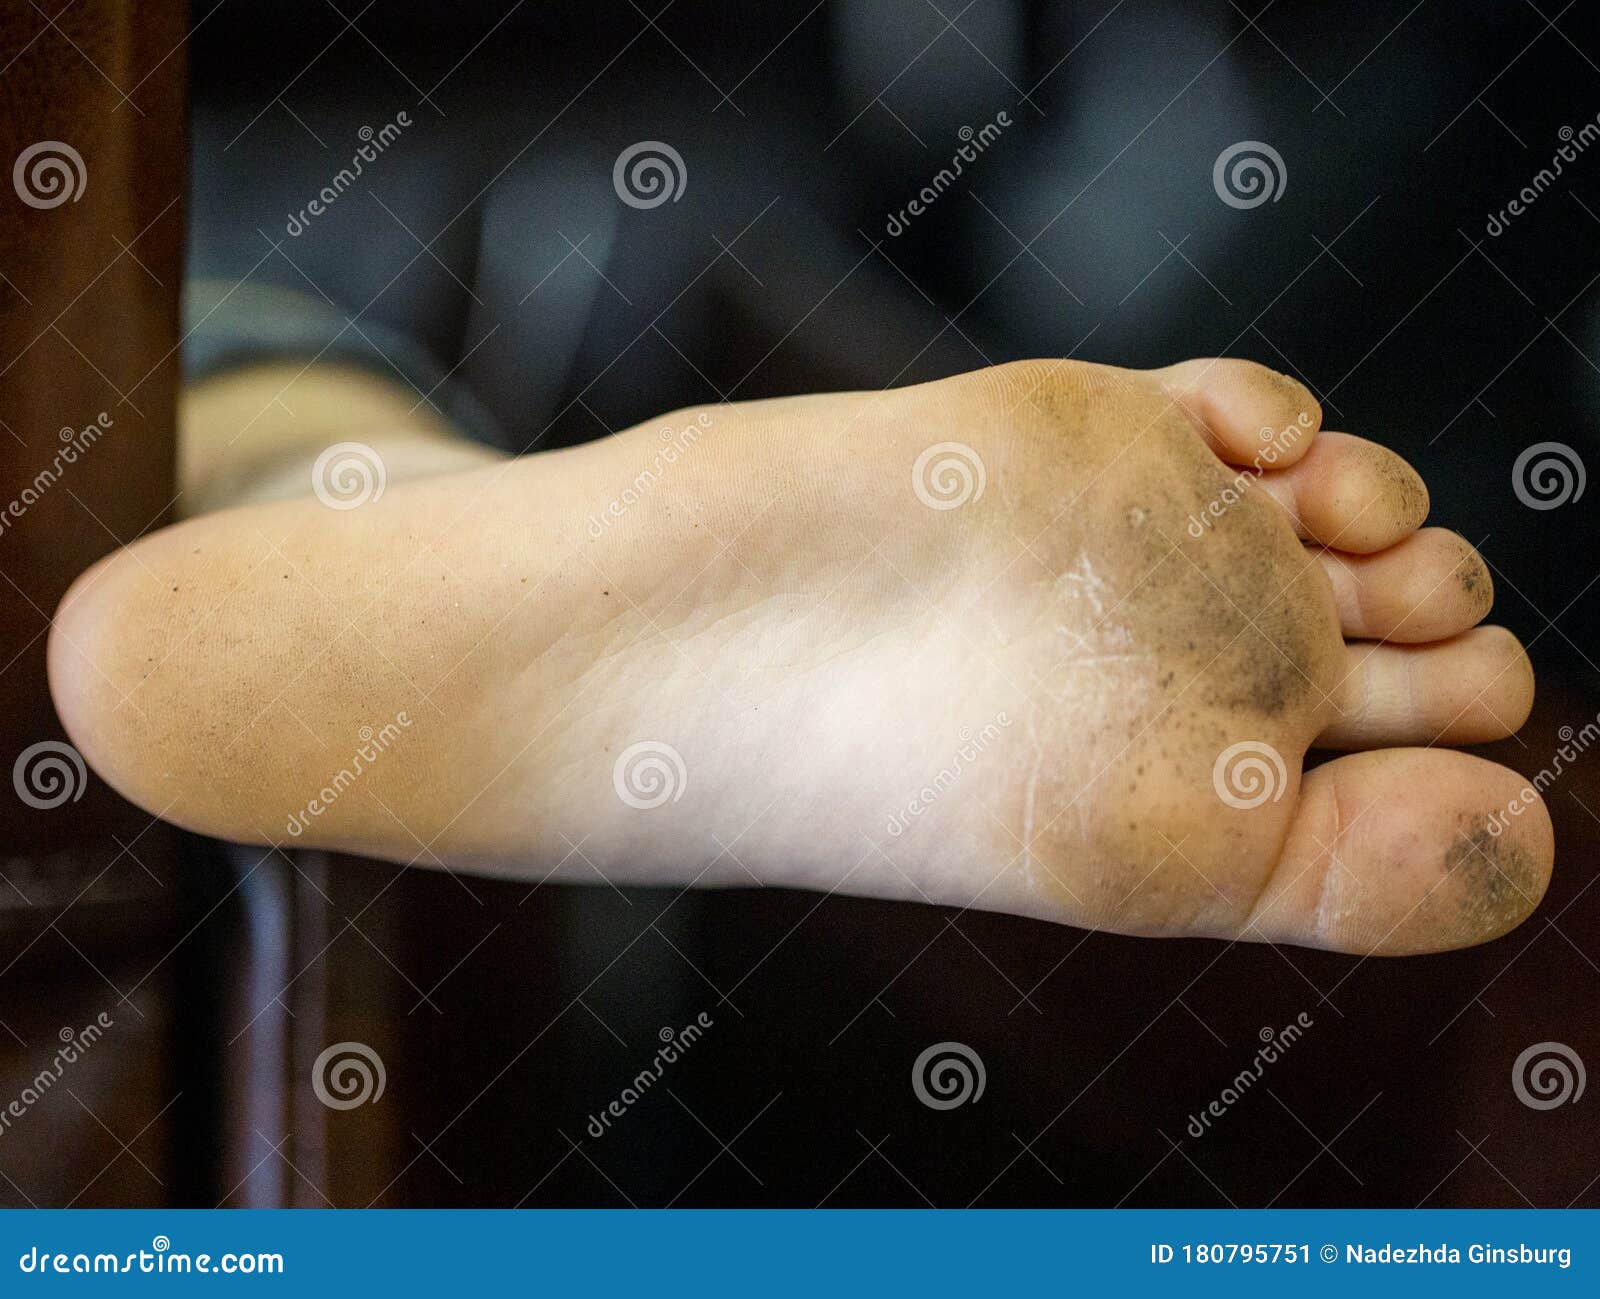 Dirty Childs Foot Closeup Stock Image Image Of Cute Activity